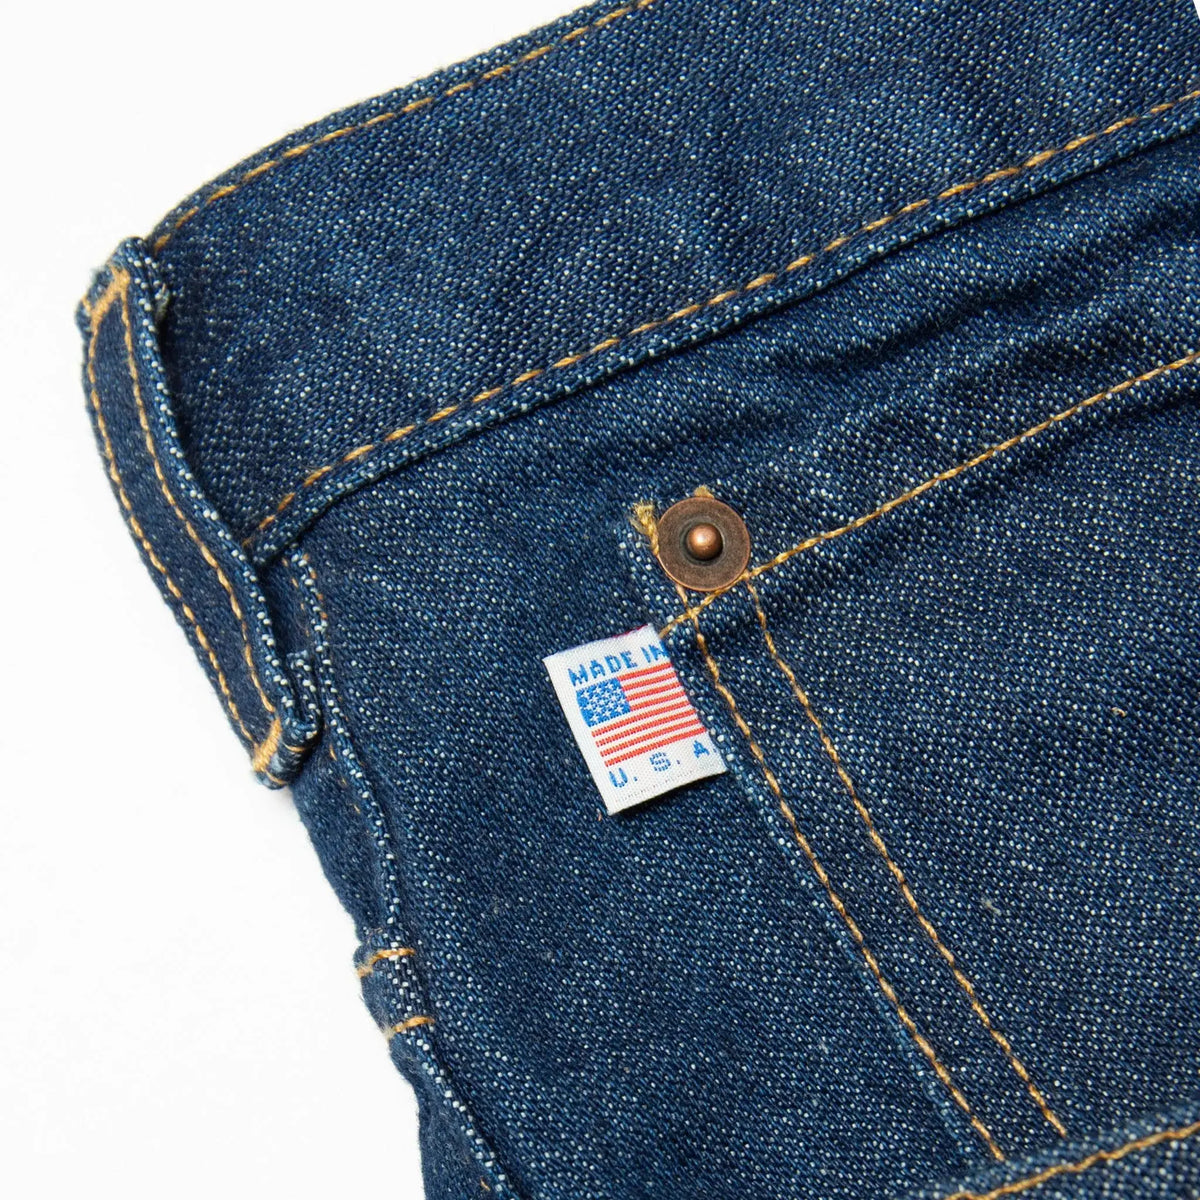 Men's Classic Jean - All American Clothing Co